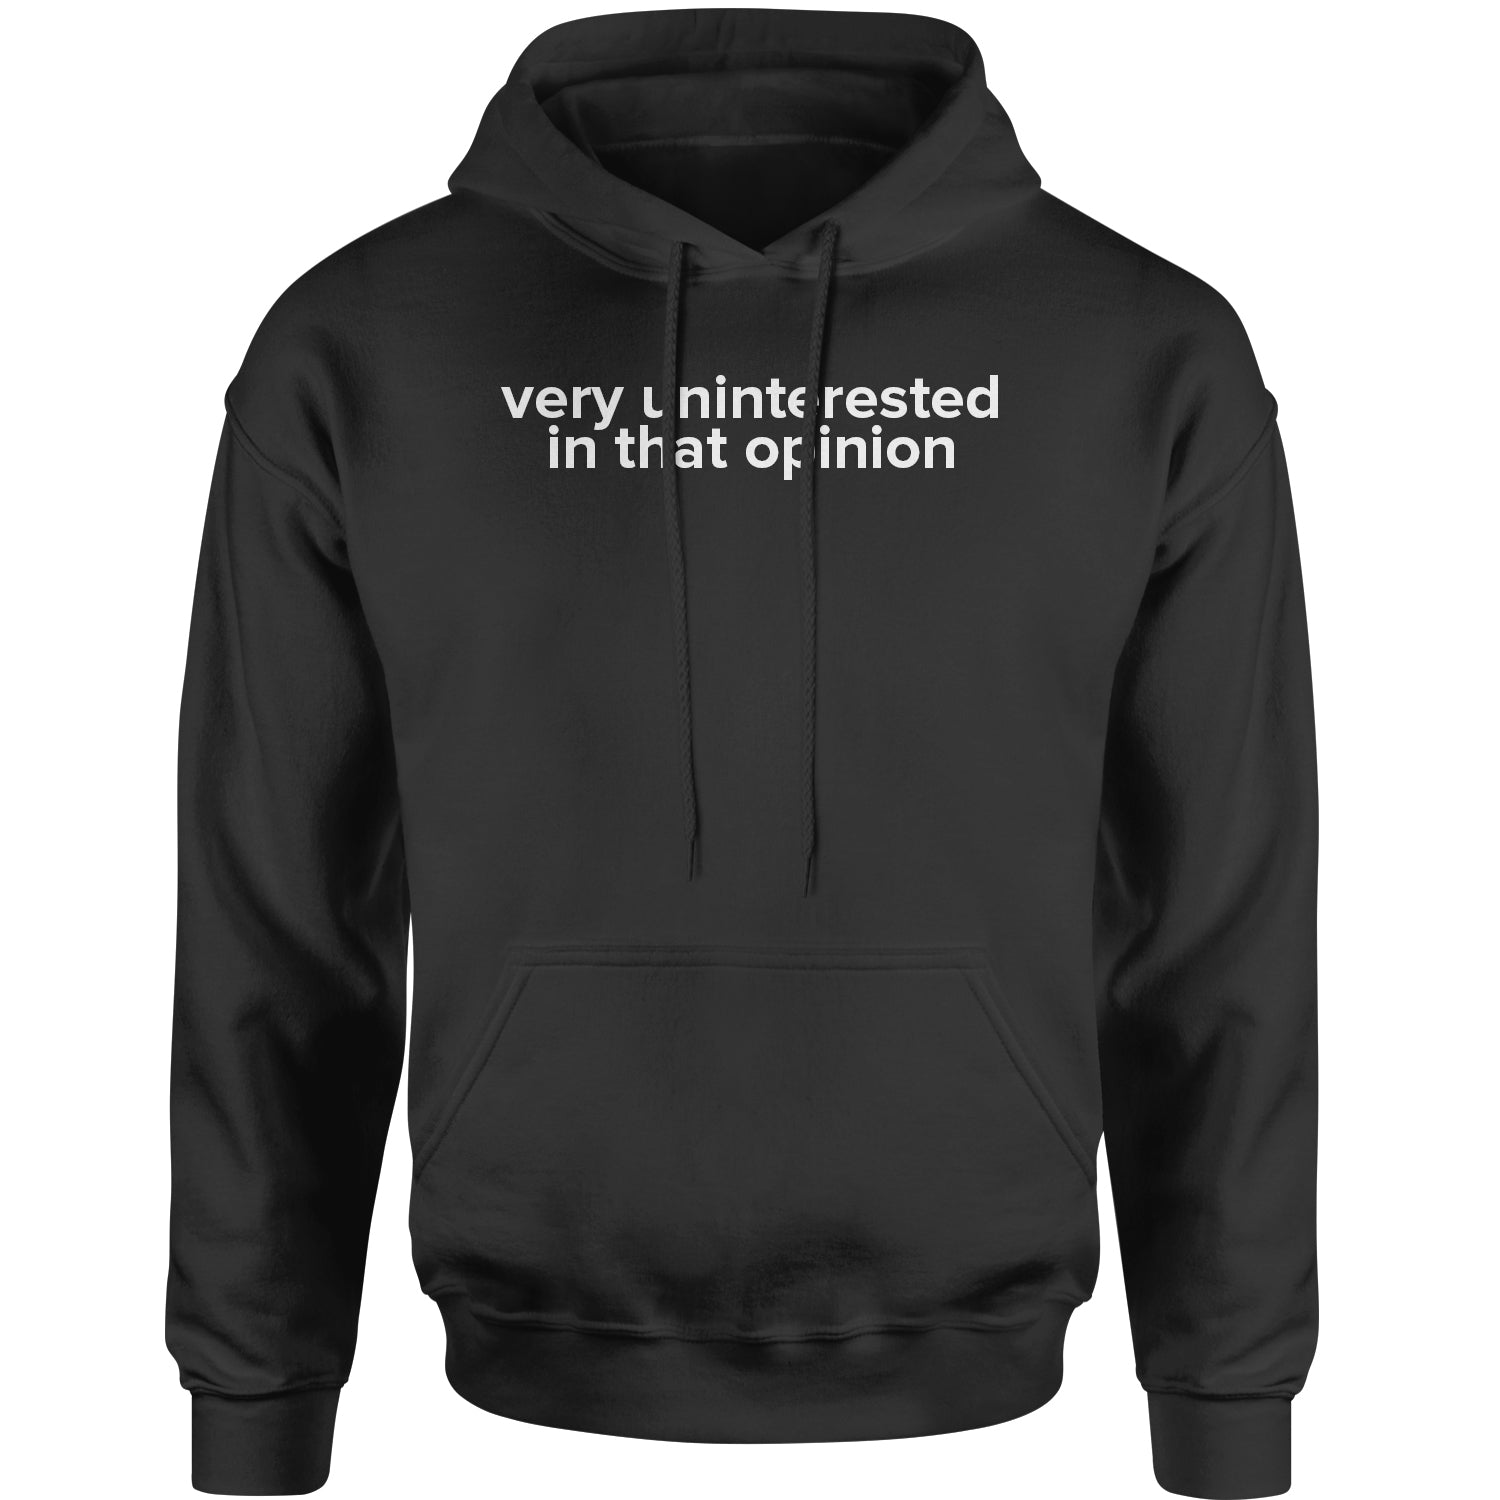 Very Uninterested In That Opinion Adult Hoodie Sweatshirt alexis, creek, d, schitt, schitts by Expression Tees